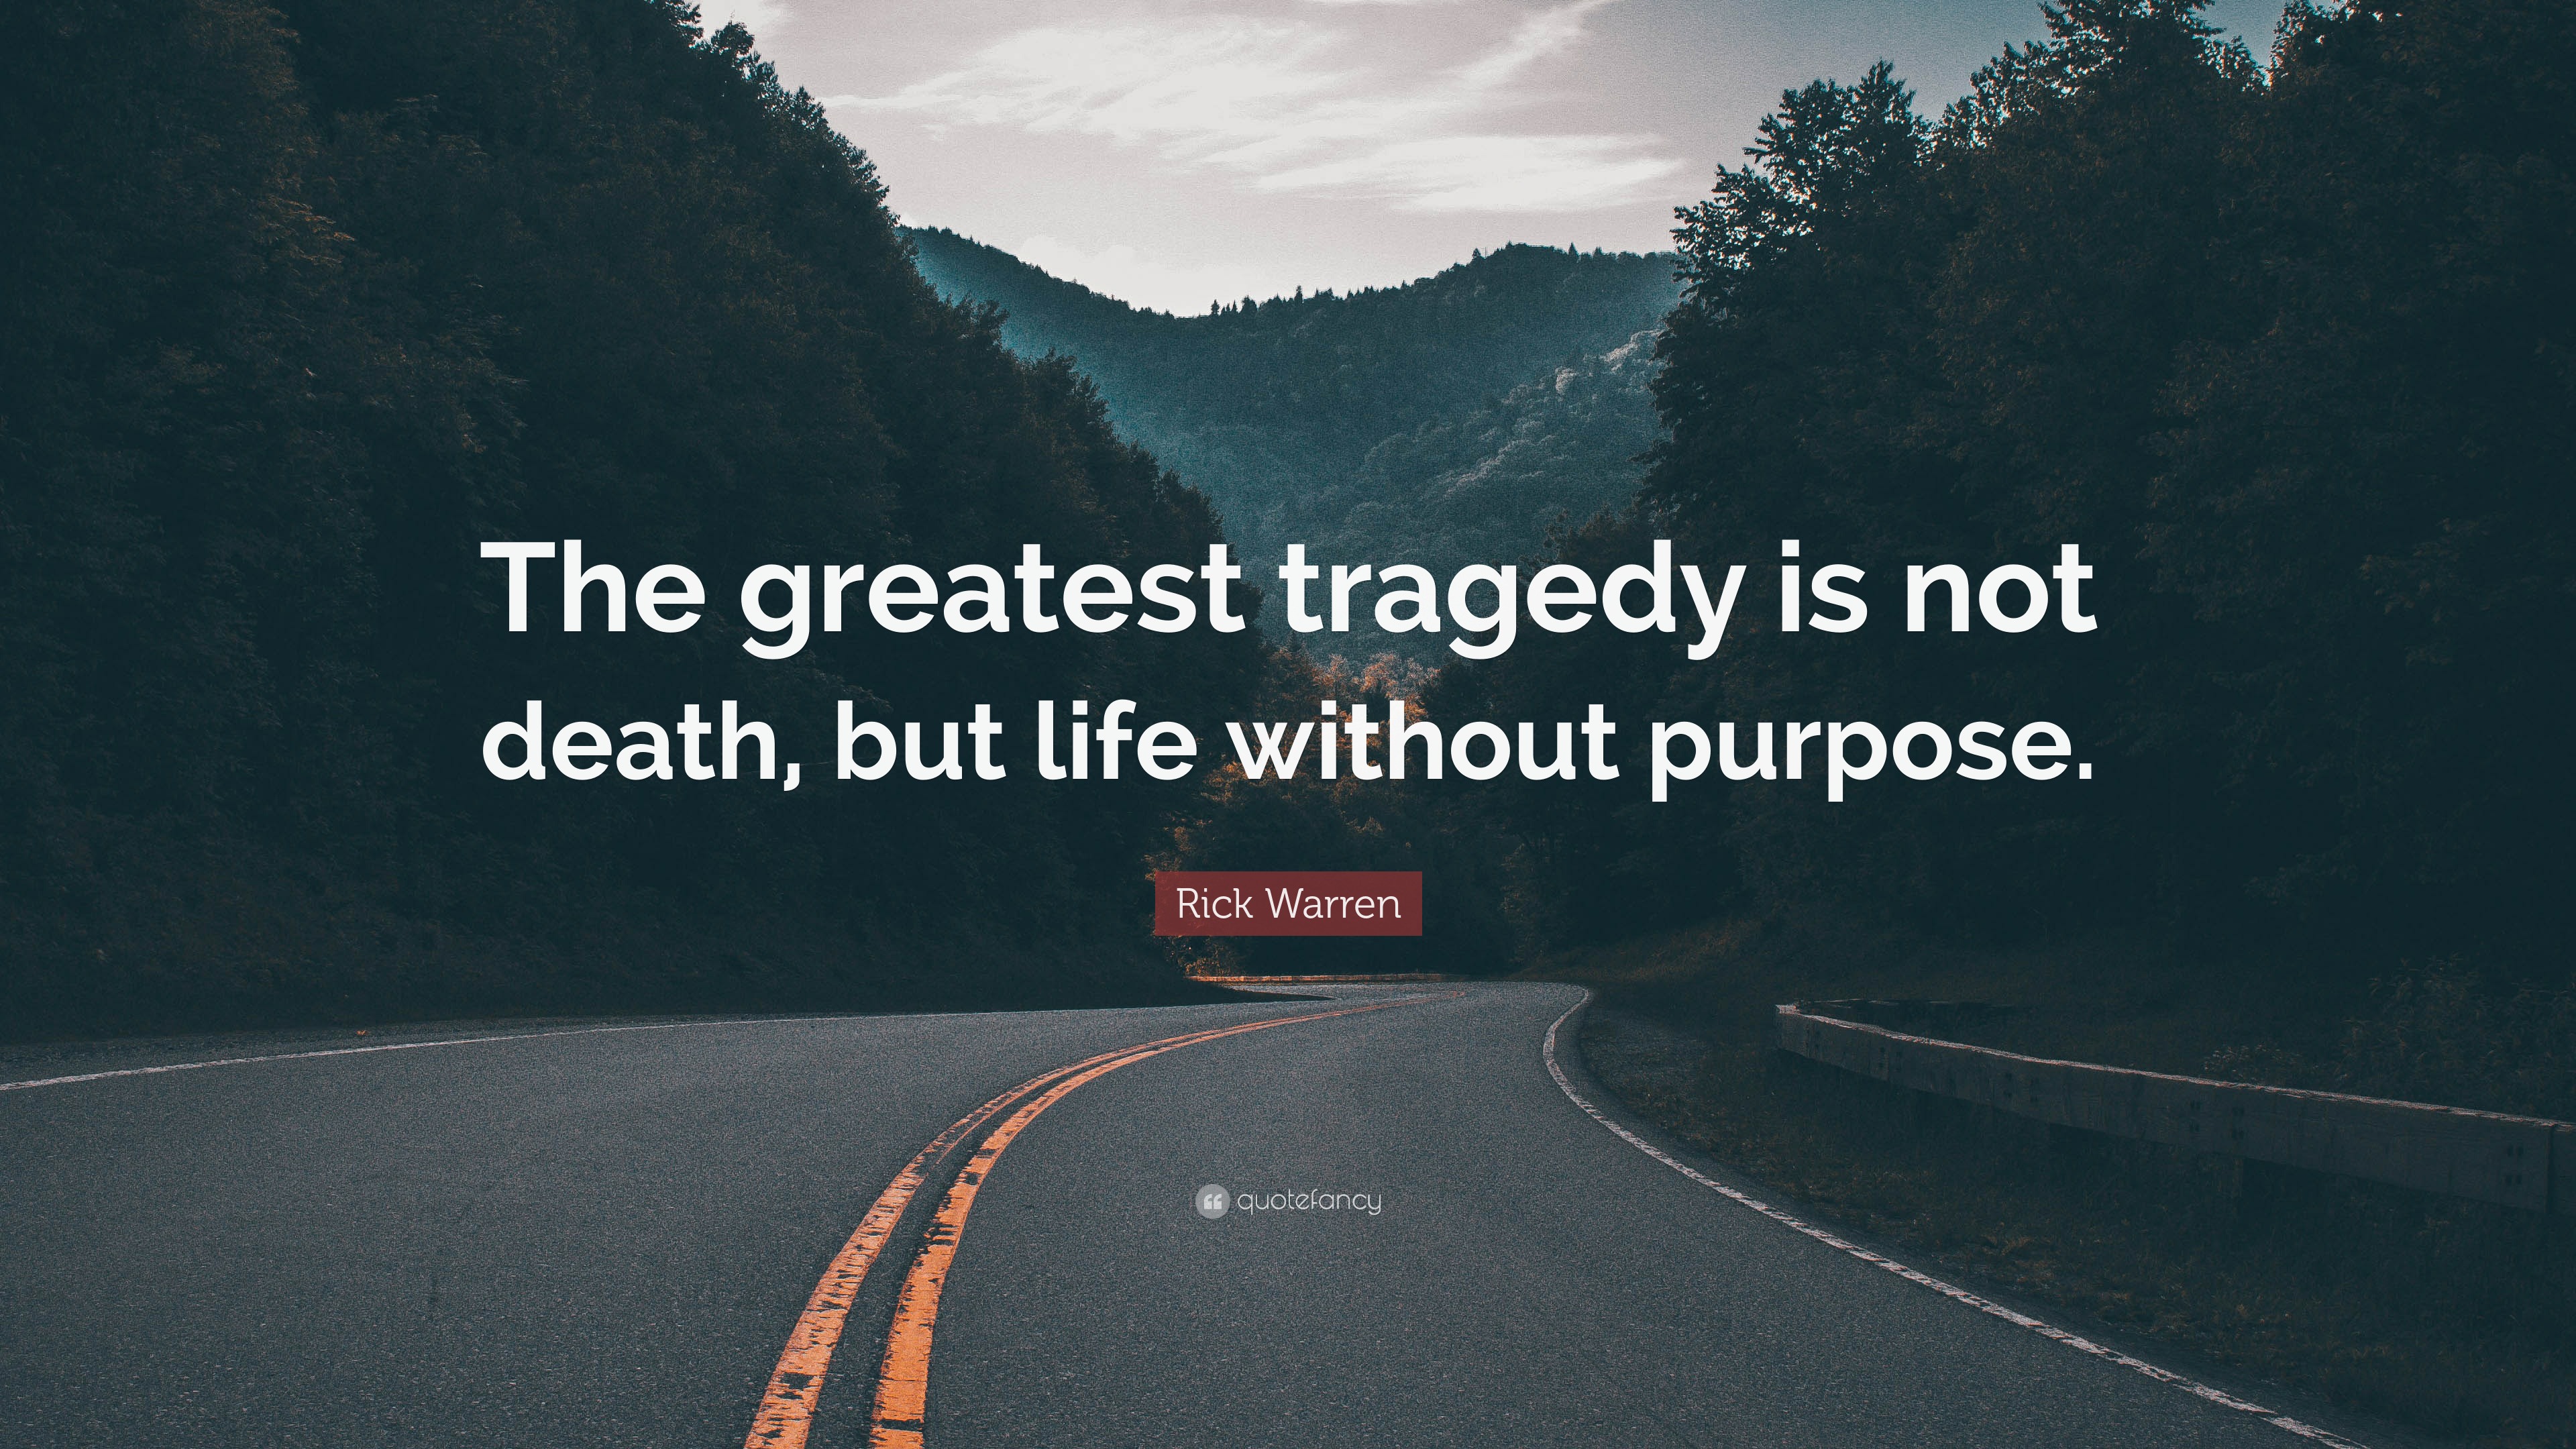 4698600 Rick Warren Quote The greatest tragedy is not death but life